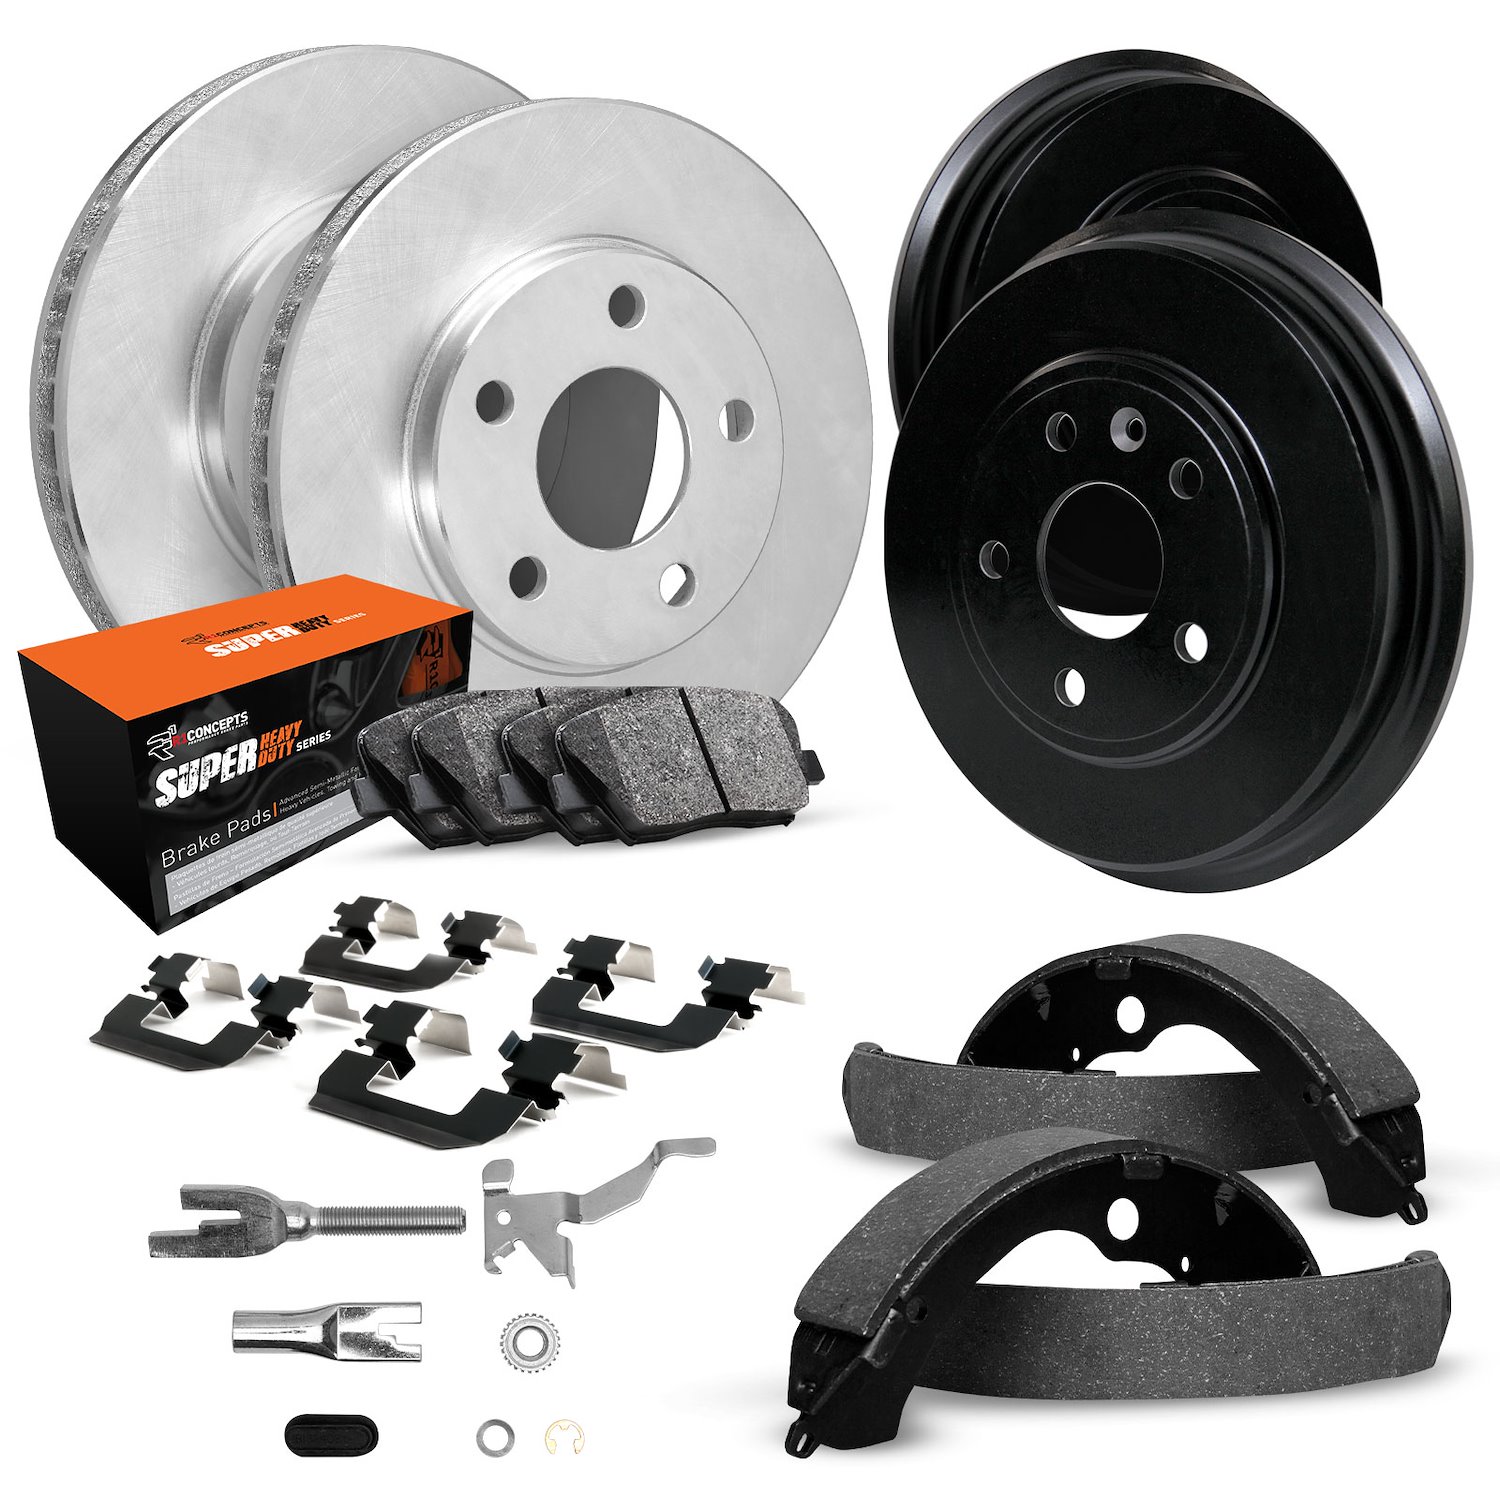 E-Line Blank Brake Rotor & Drum Set w/Super-Duty Pads, Shoes, Hardware, & Adjusters, 1988-1996 GM, Position: Front & Rear